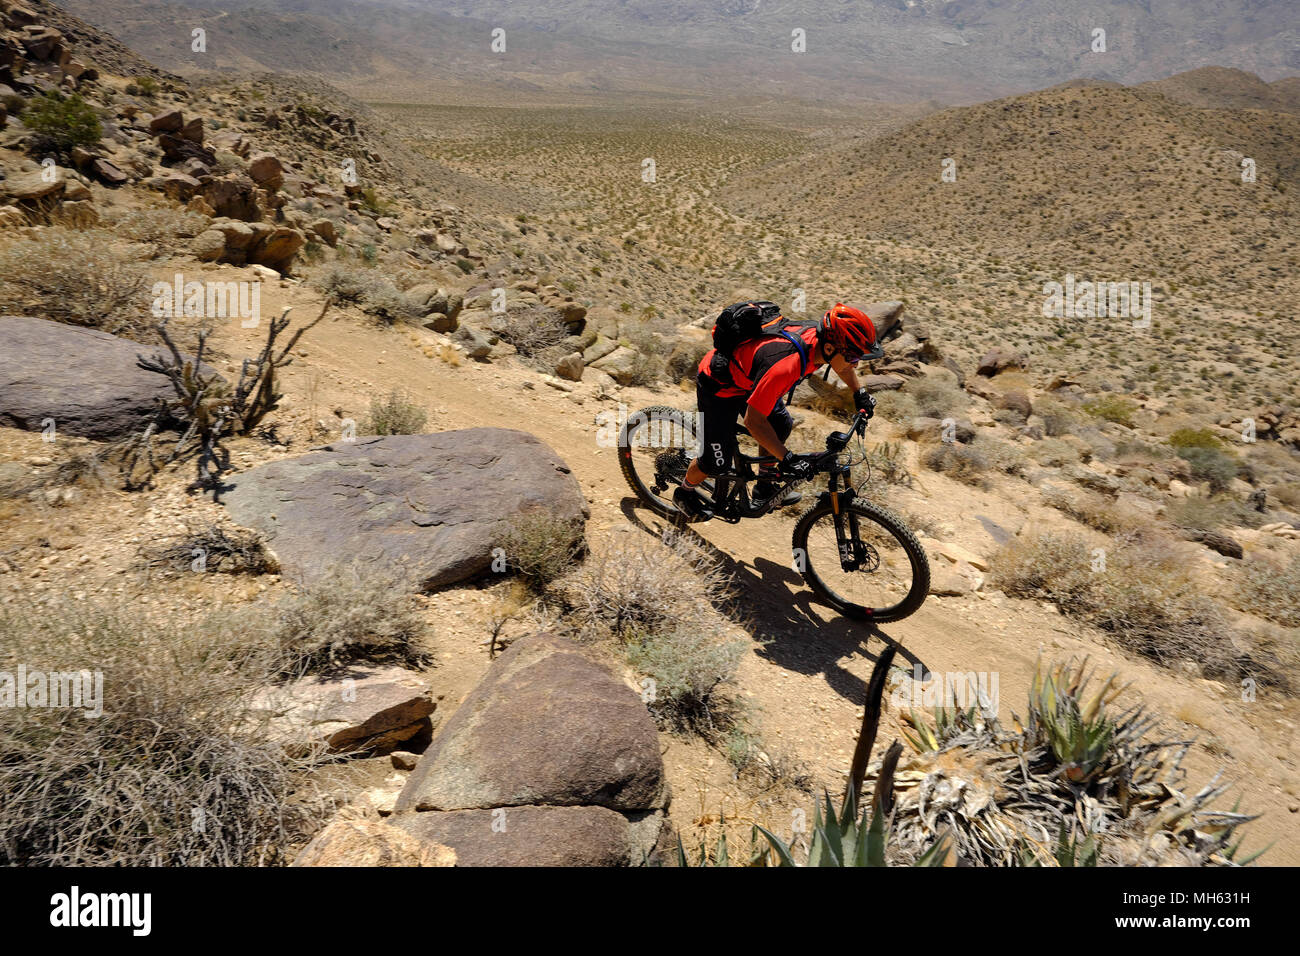 Palm Springs, California, USA. 28th Apr, 2018. Mountain bikers pass cactus and high desert vistas on the trail. This is a true Southern California Epic mountain bike ride in the Santa Rosa and San Jacinto Mountains National Monument. Offering huge vistas, off-camber narrow single track, ridges, stream beds, rocks, sand, cactus. This point-to-point route passes a varied array of high desert trails from the foot of the north slope of Santa Rosa Mountains and Agua Caliente Indian Reservation at 4500 feet down to Palm Springs 29 miles away at 500 feet. (Credit Image: © Ruaridh Stewart via ZUMA Wi Stock Photo